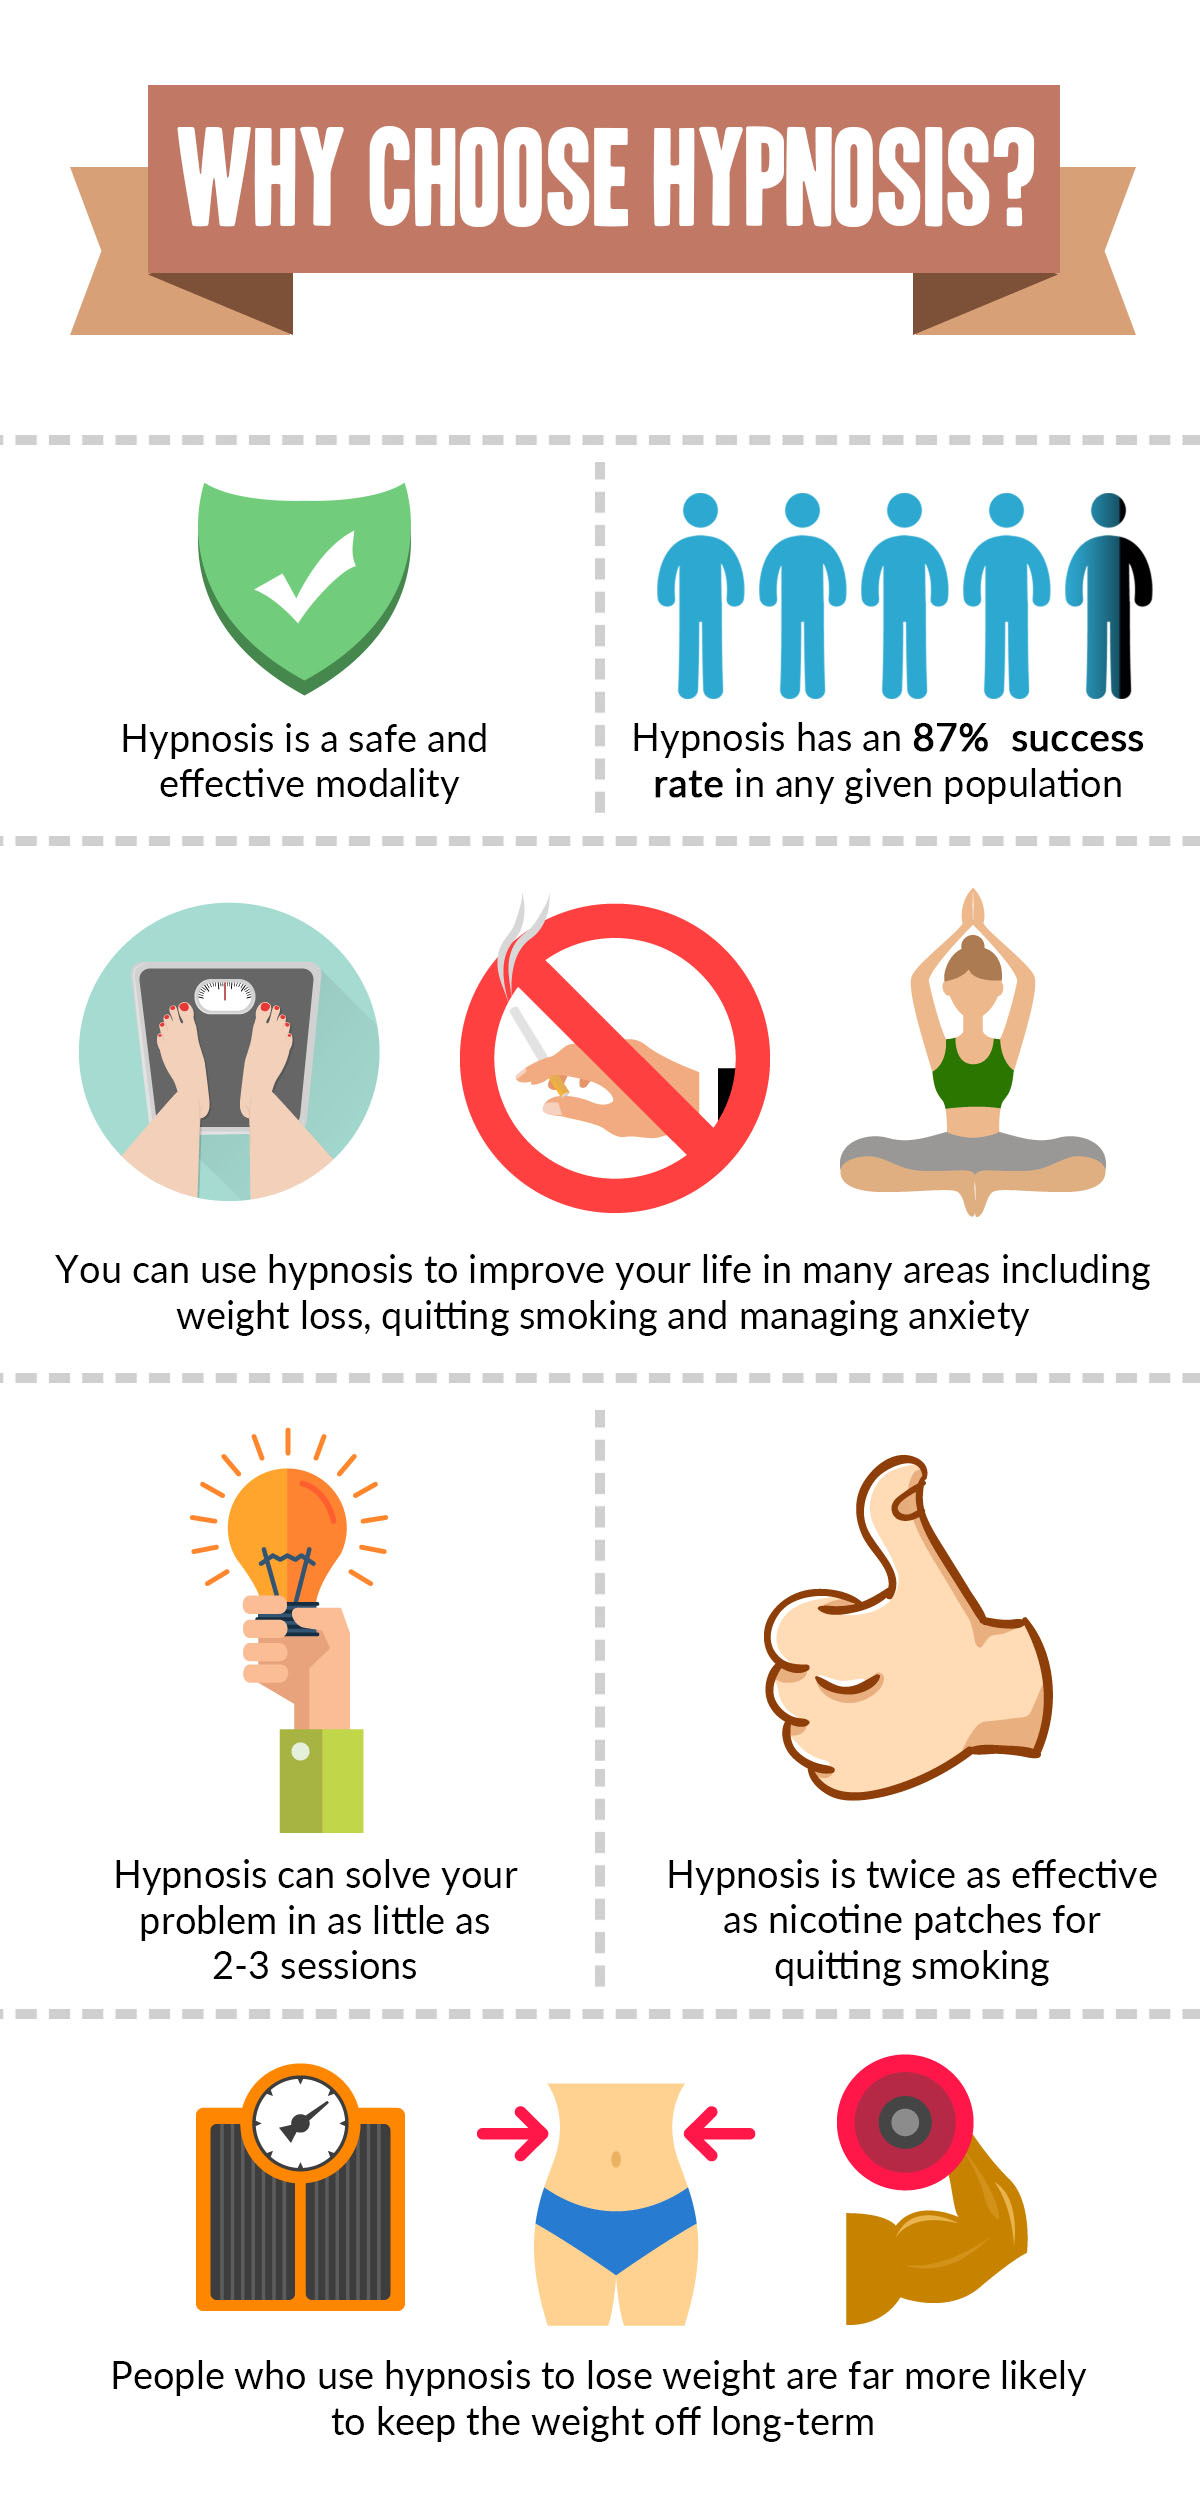 reasons why hypnosis is an effective choice to change unwanted habits quickly and easily, as explained by our hypnosis expert in this infographic